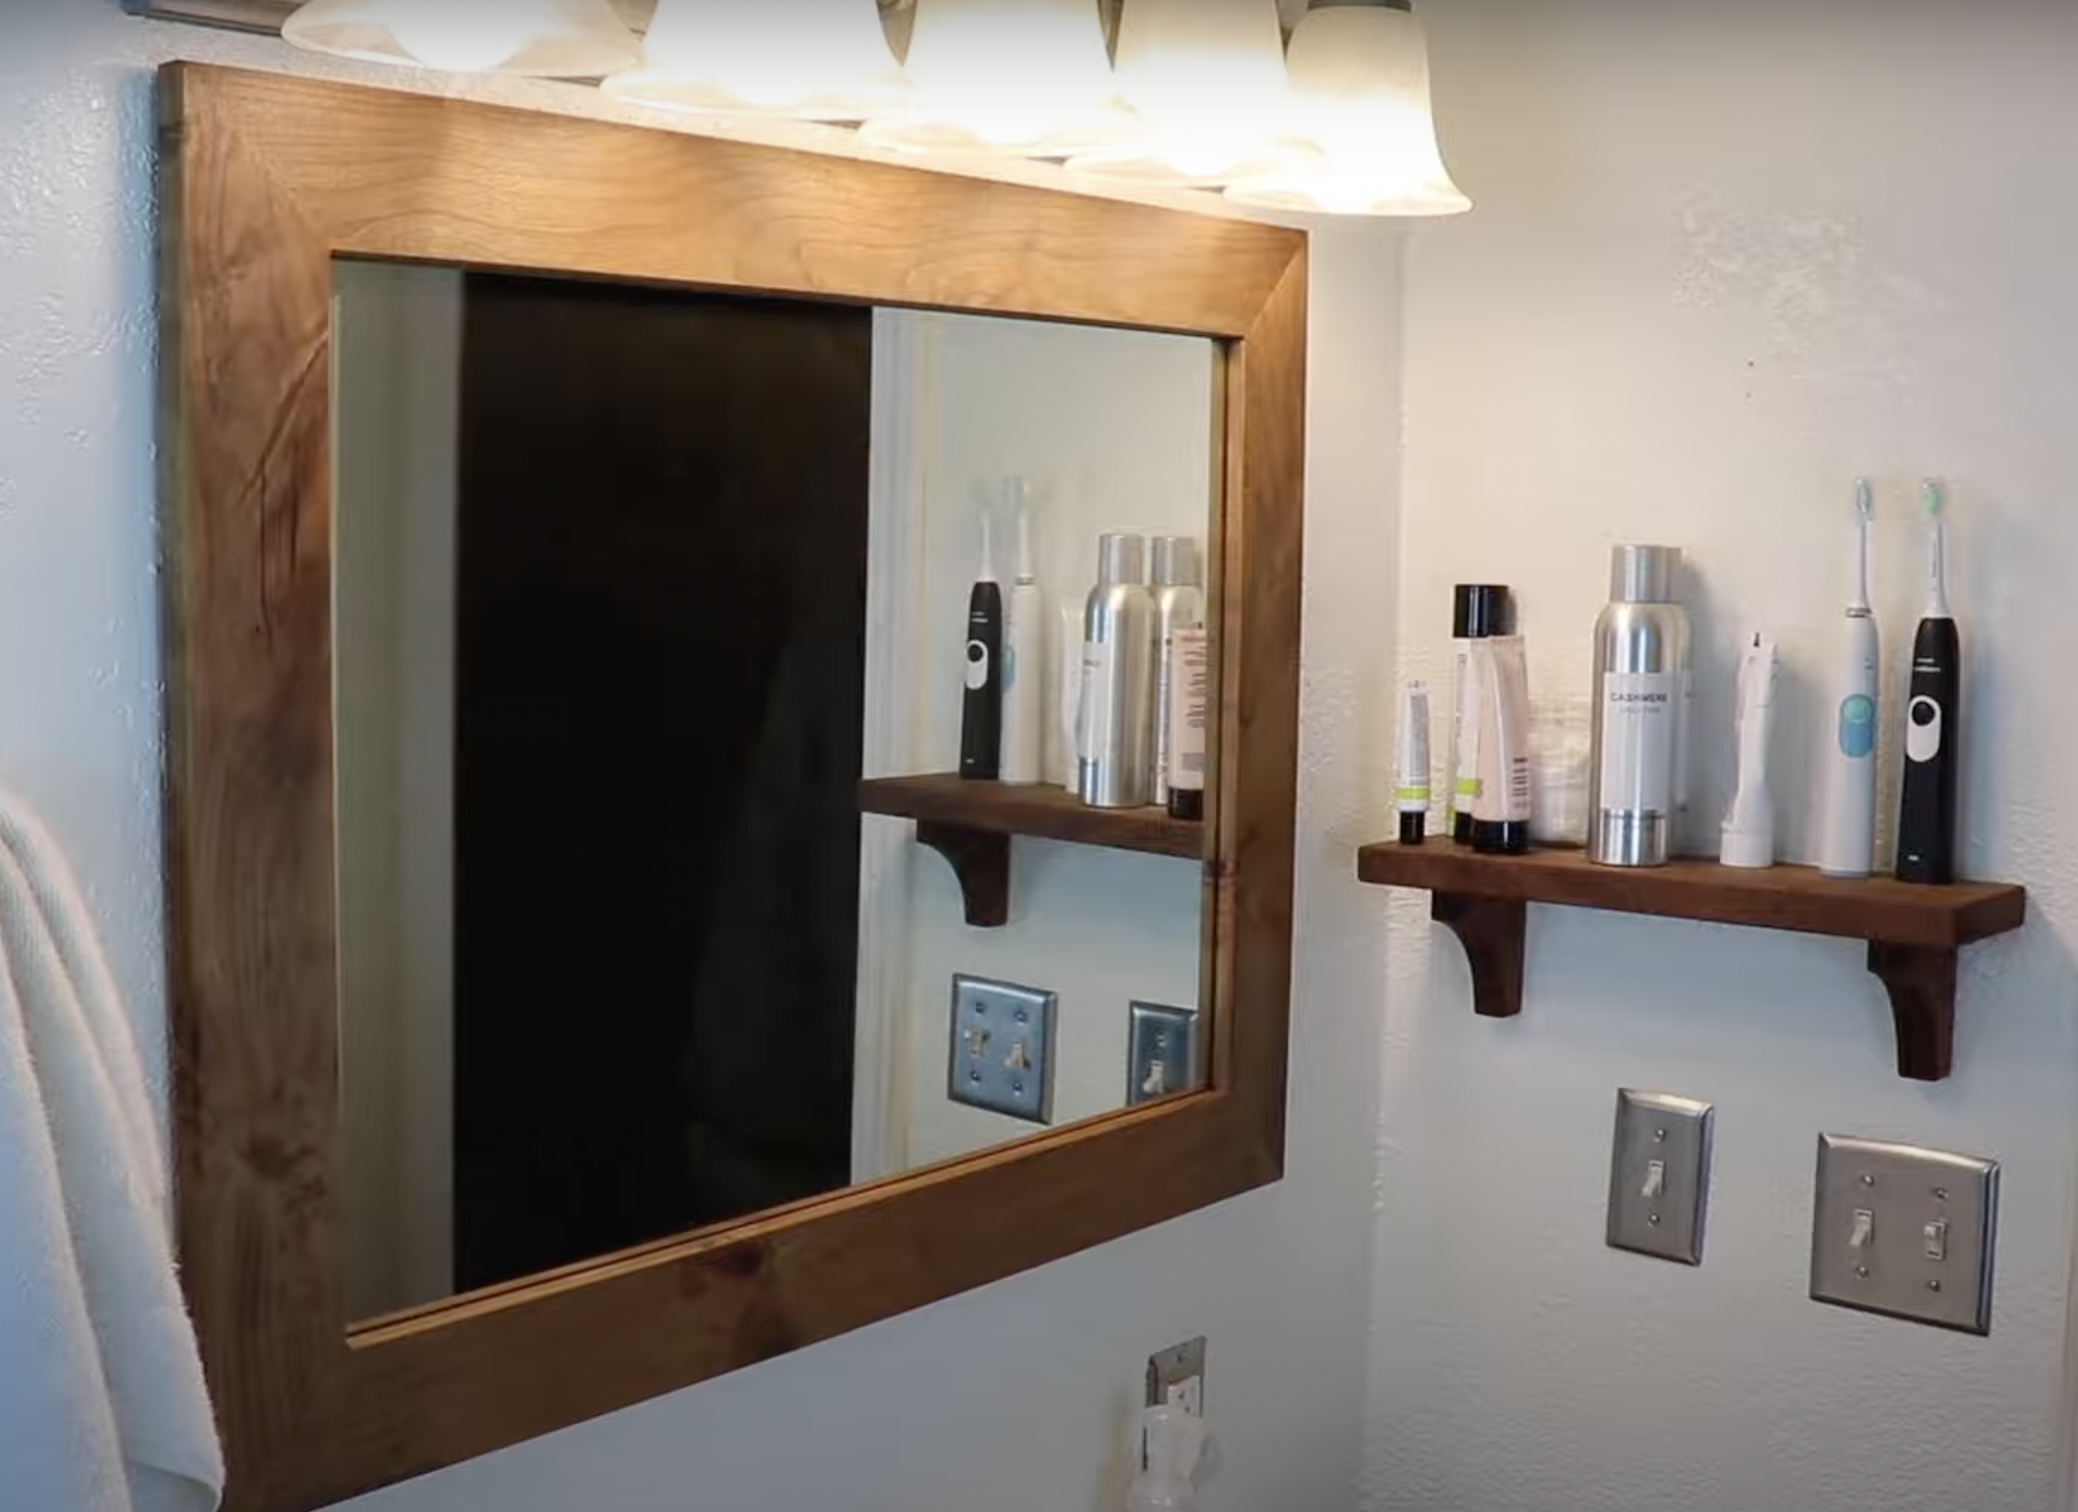 DIY Projects with Mirrors